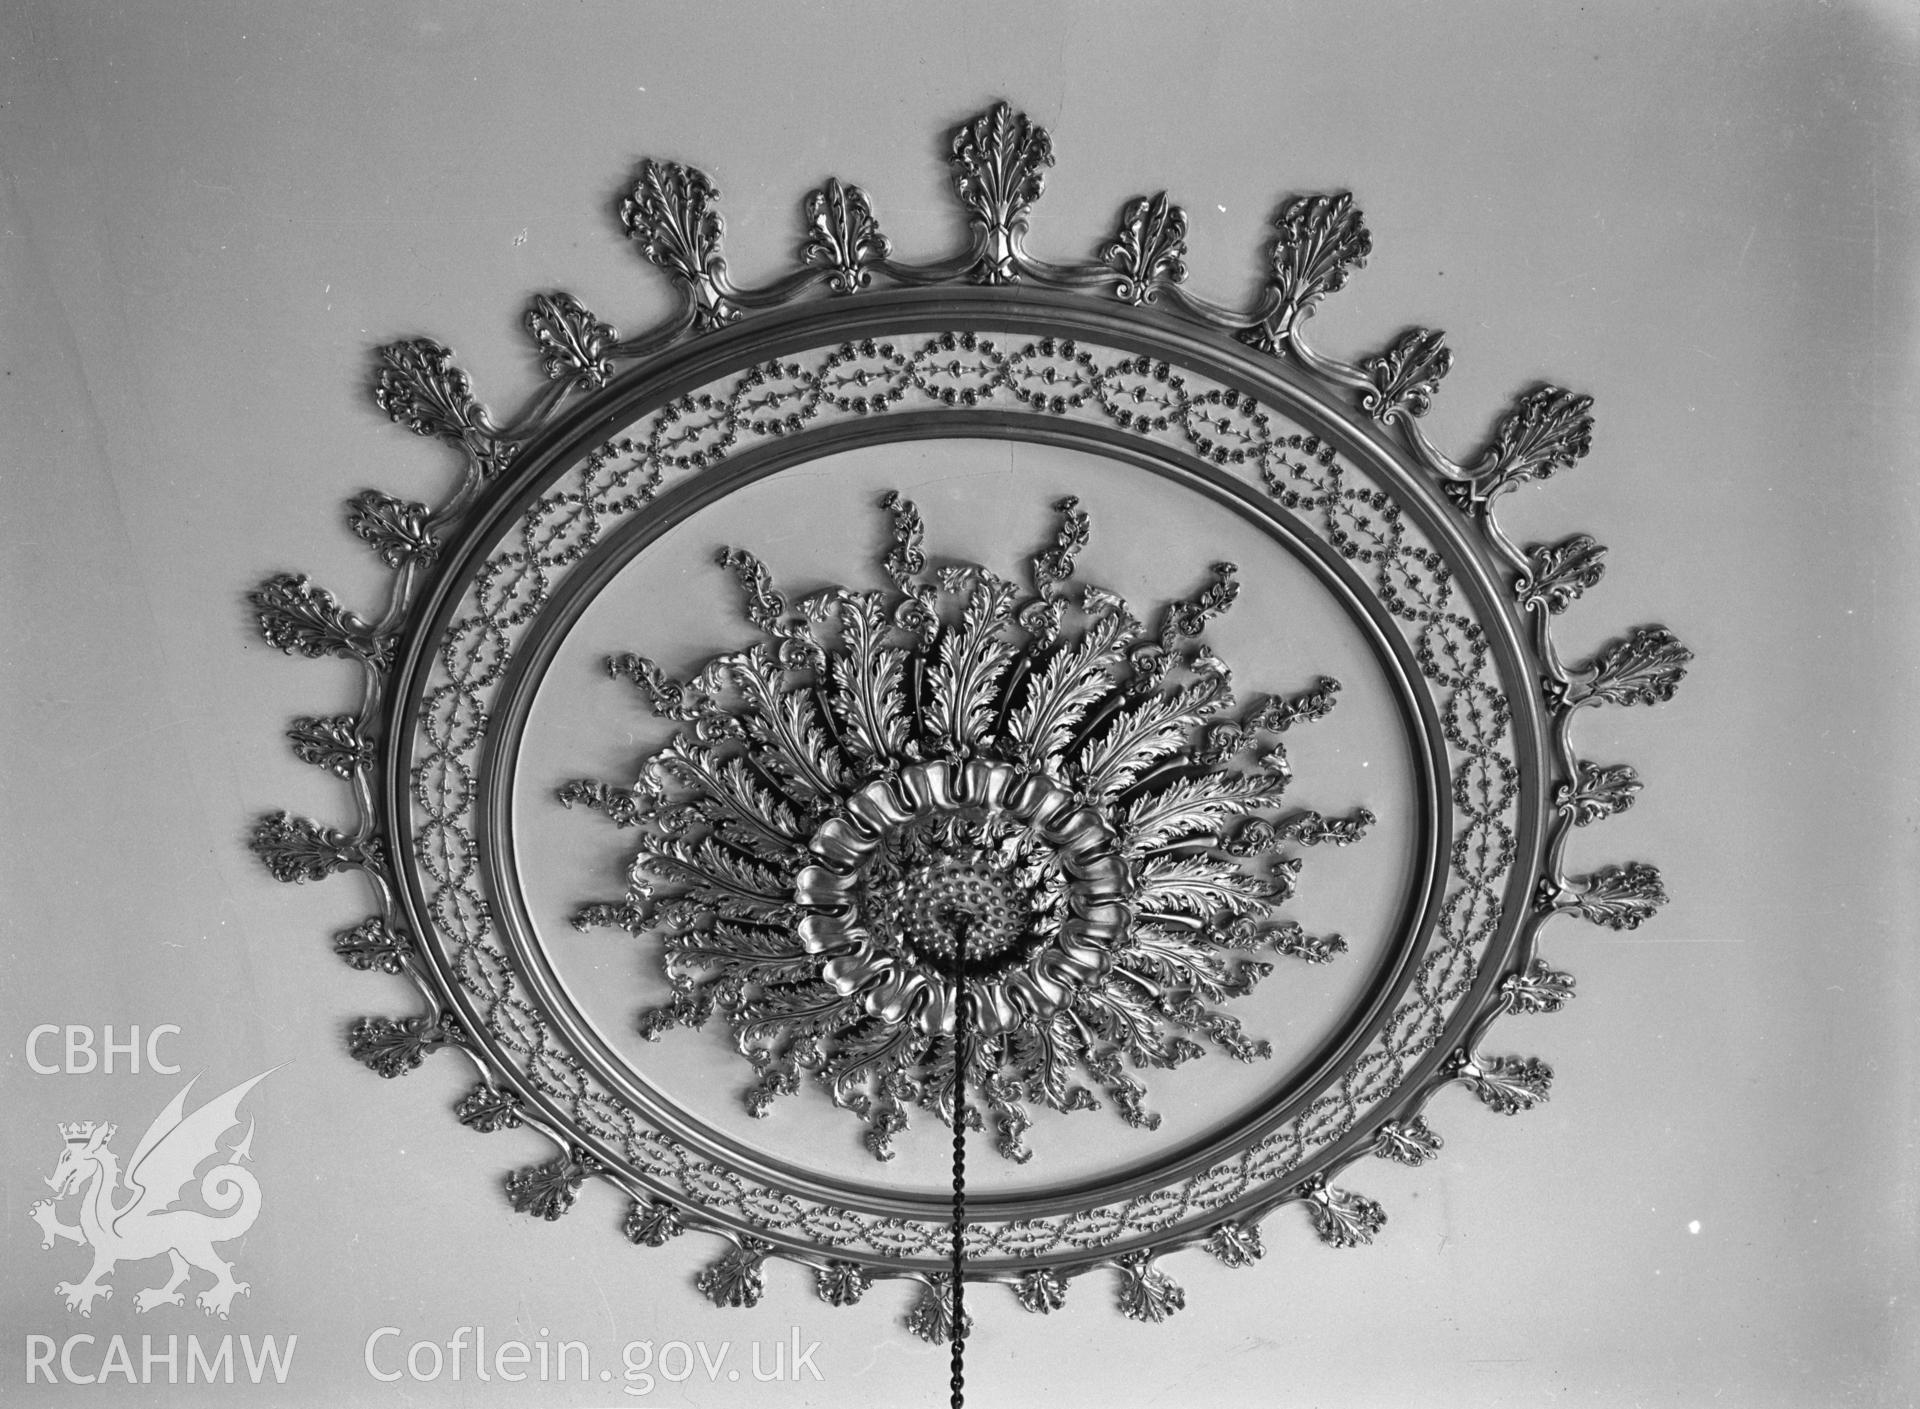 Interior view showing ceiling feature in drawing room at Glynllifon Hall